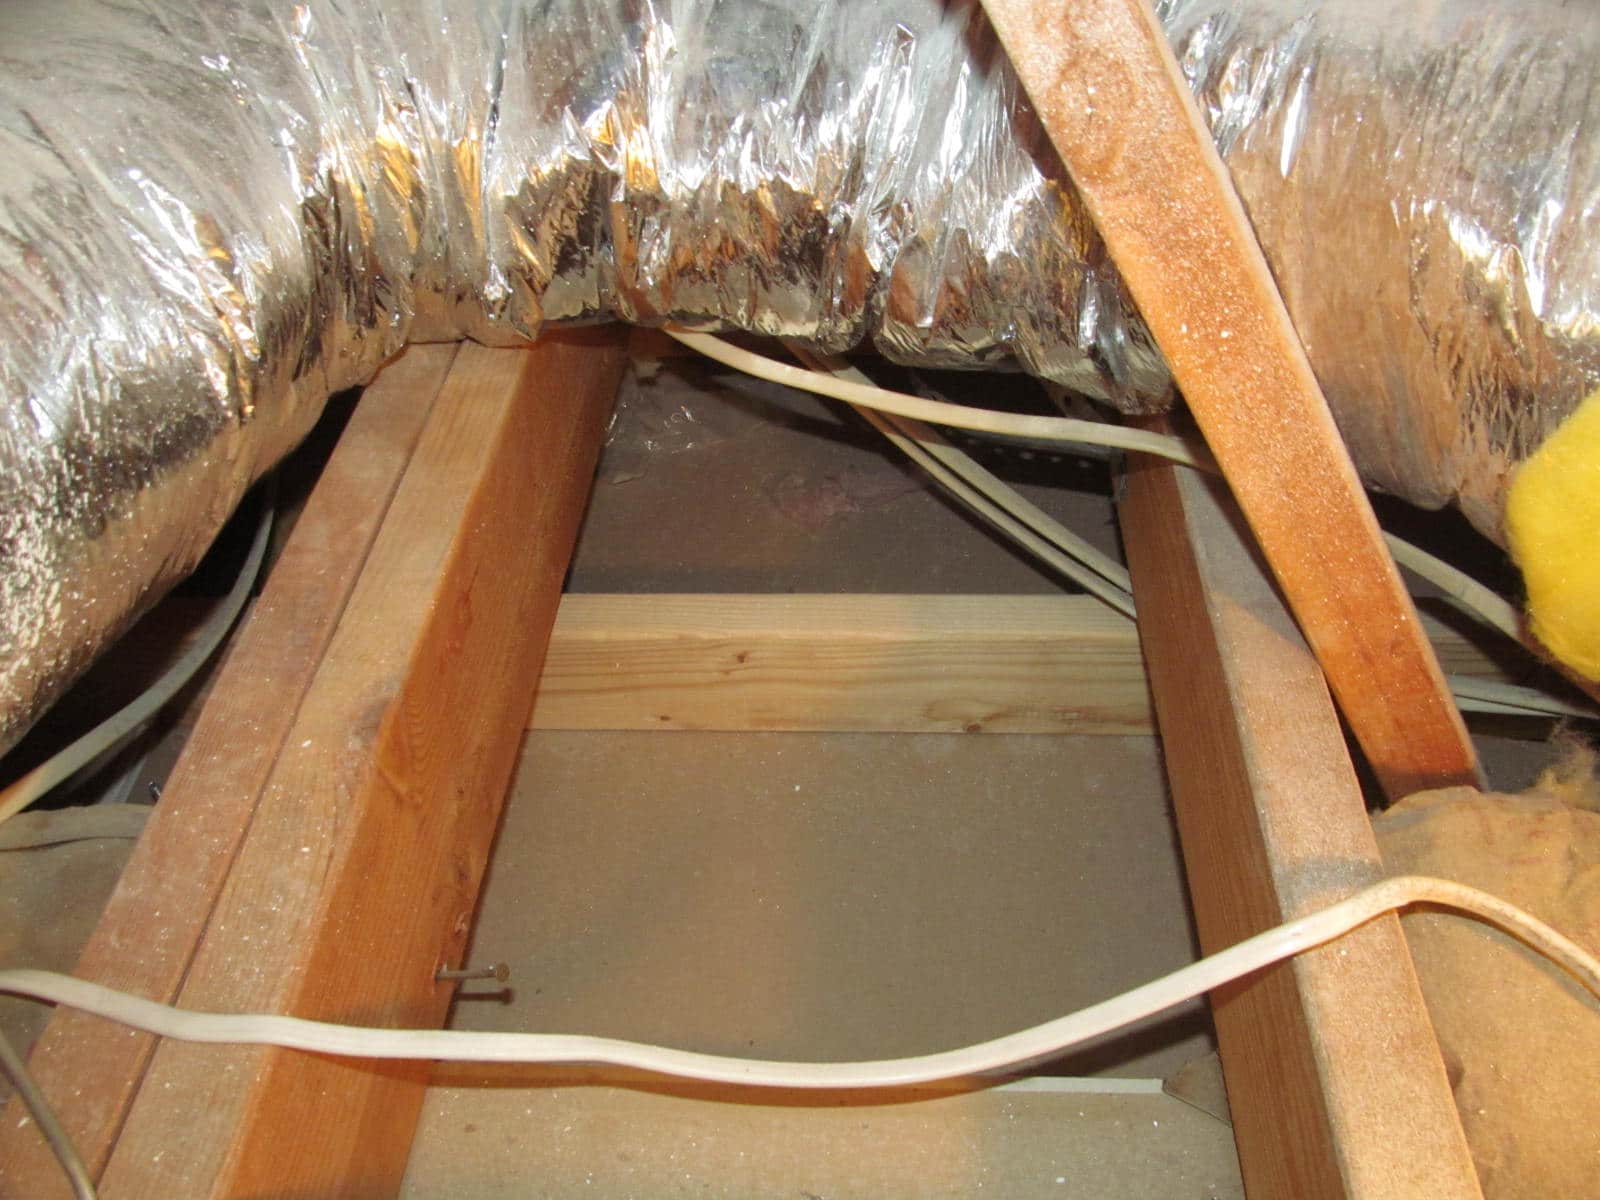 Insulation Vent Shields In The Attic Fire Safety Buyers Ask